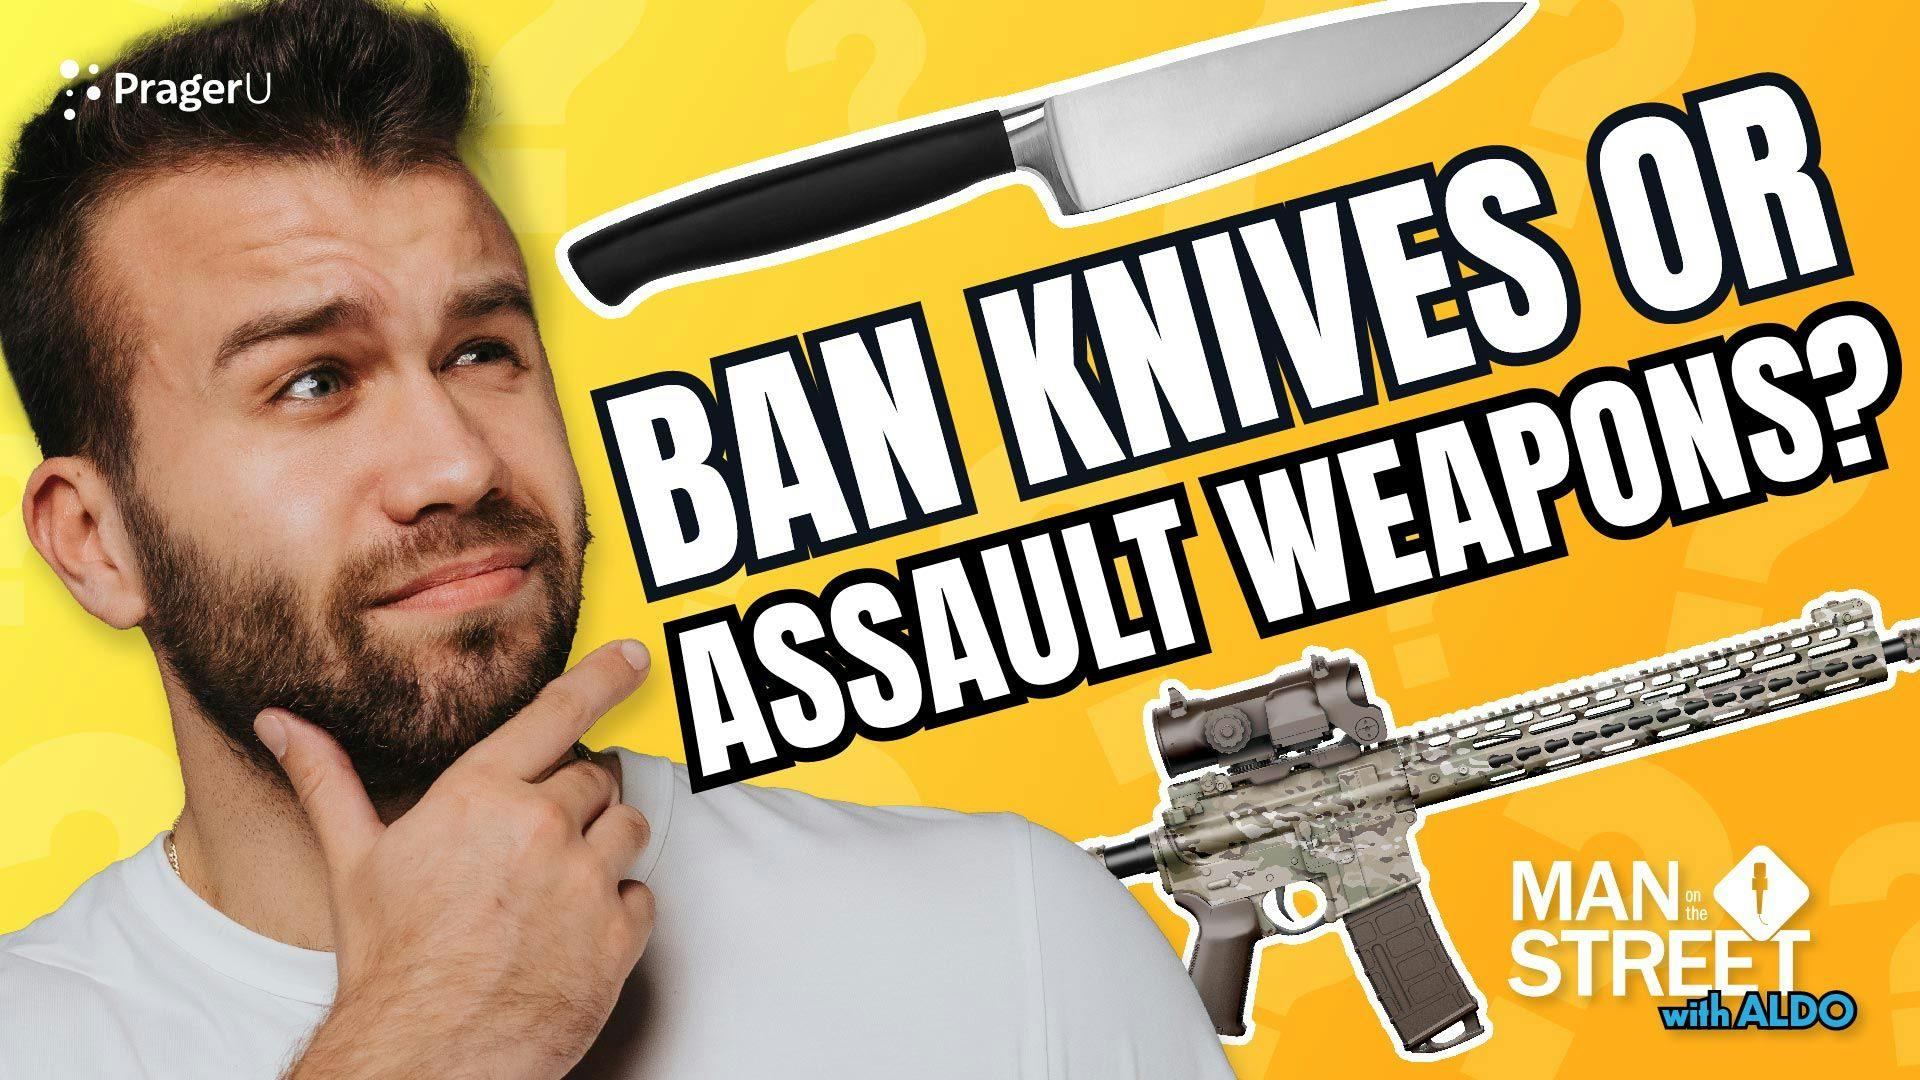 Are Knives More Dangerous than "Assault Weapons"?